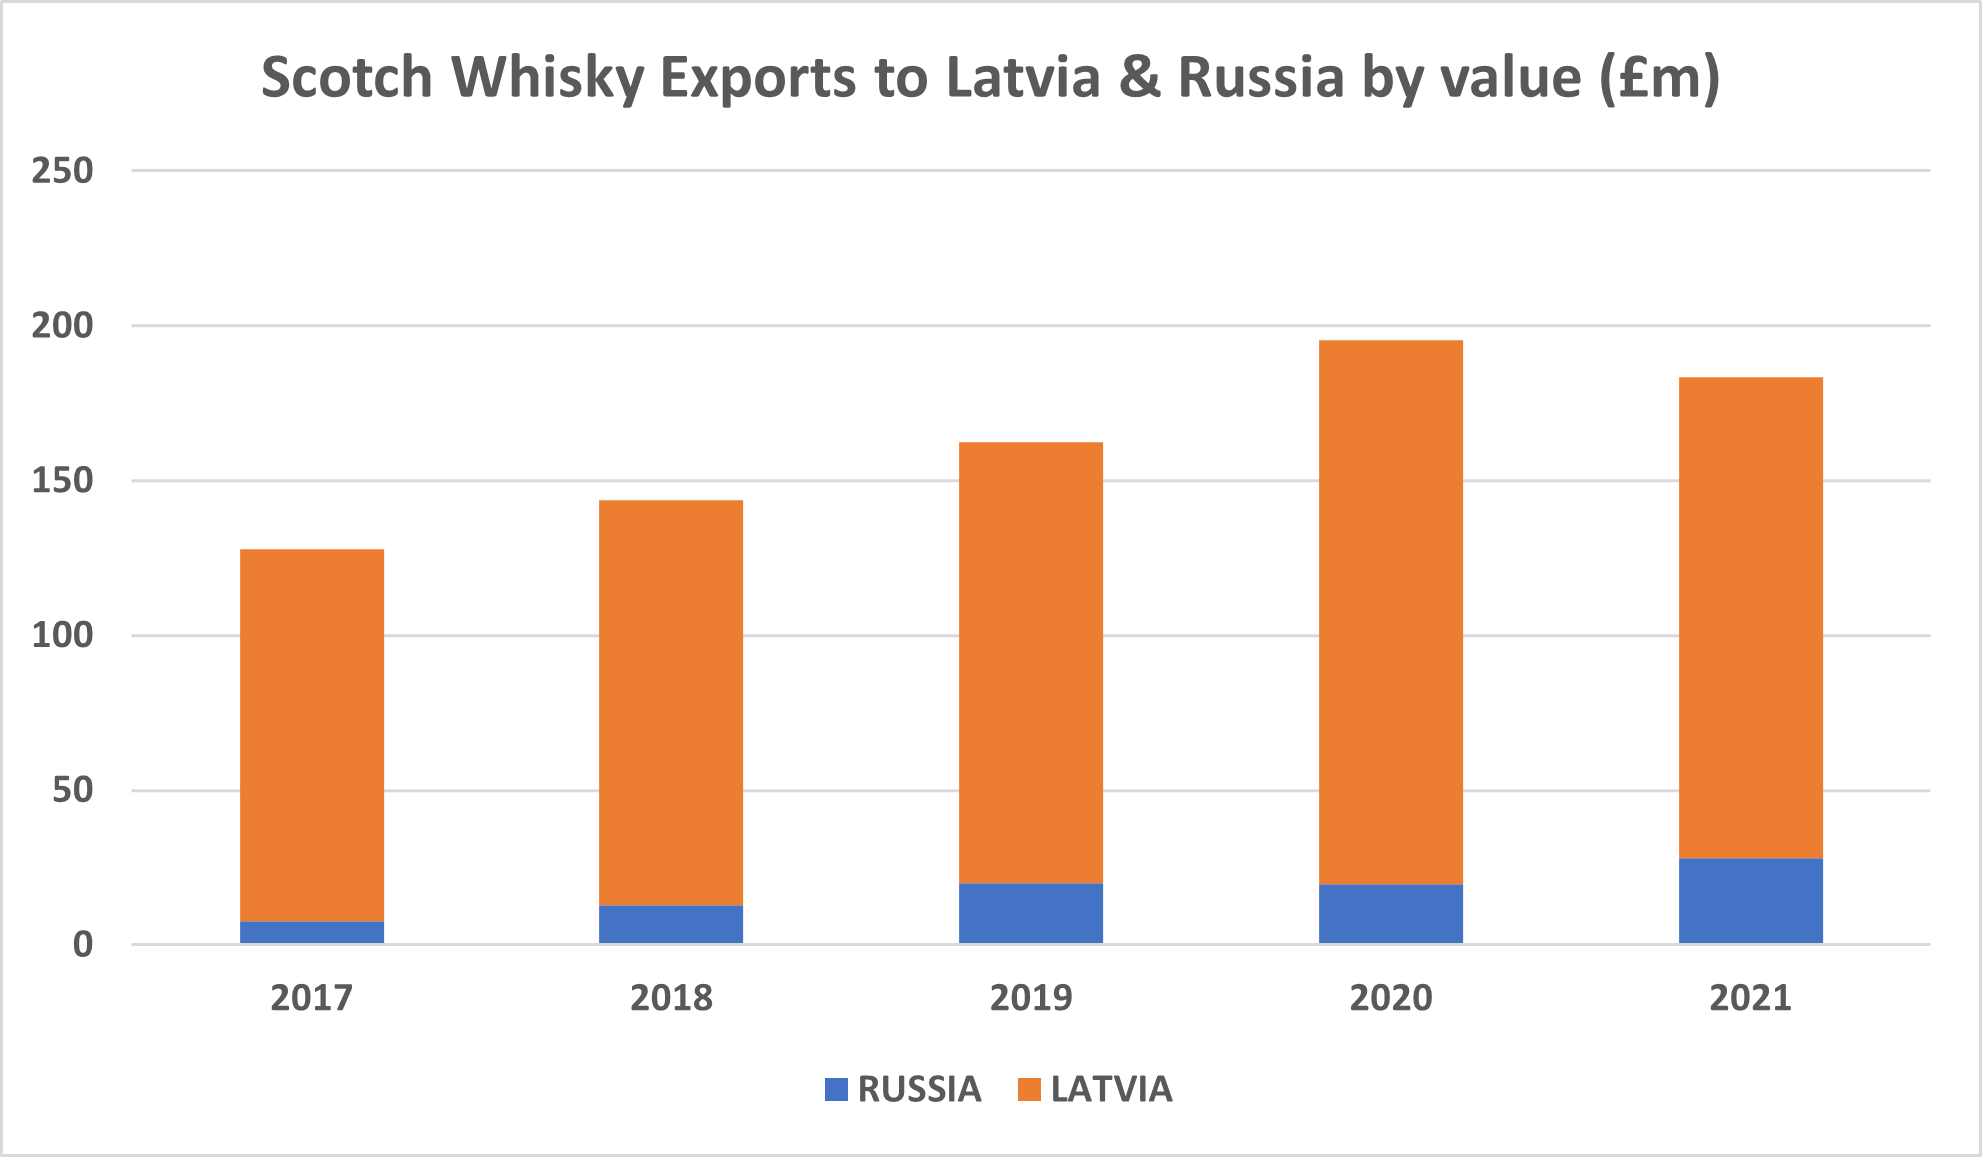 (chart of Scotch exports to Russia and Latvia) Much like Singapore/China, Latvia acts as a proxy for imports into Russia.